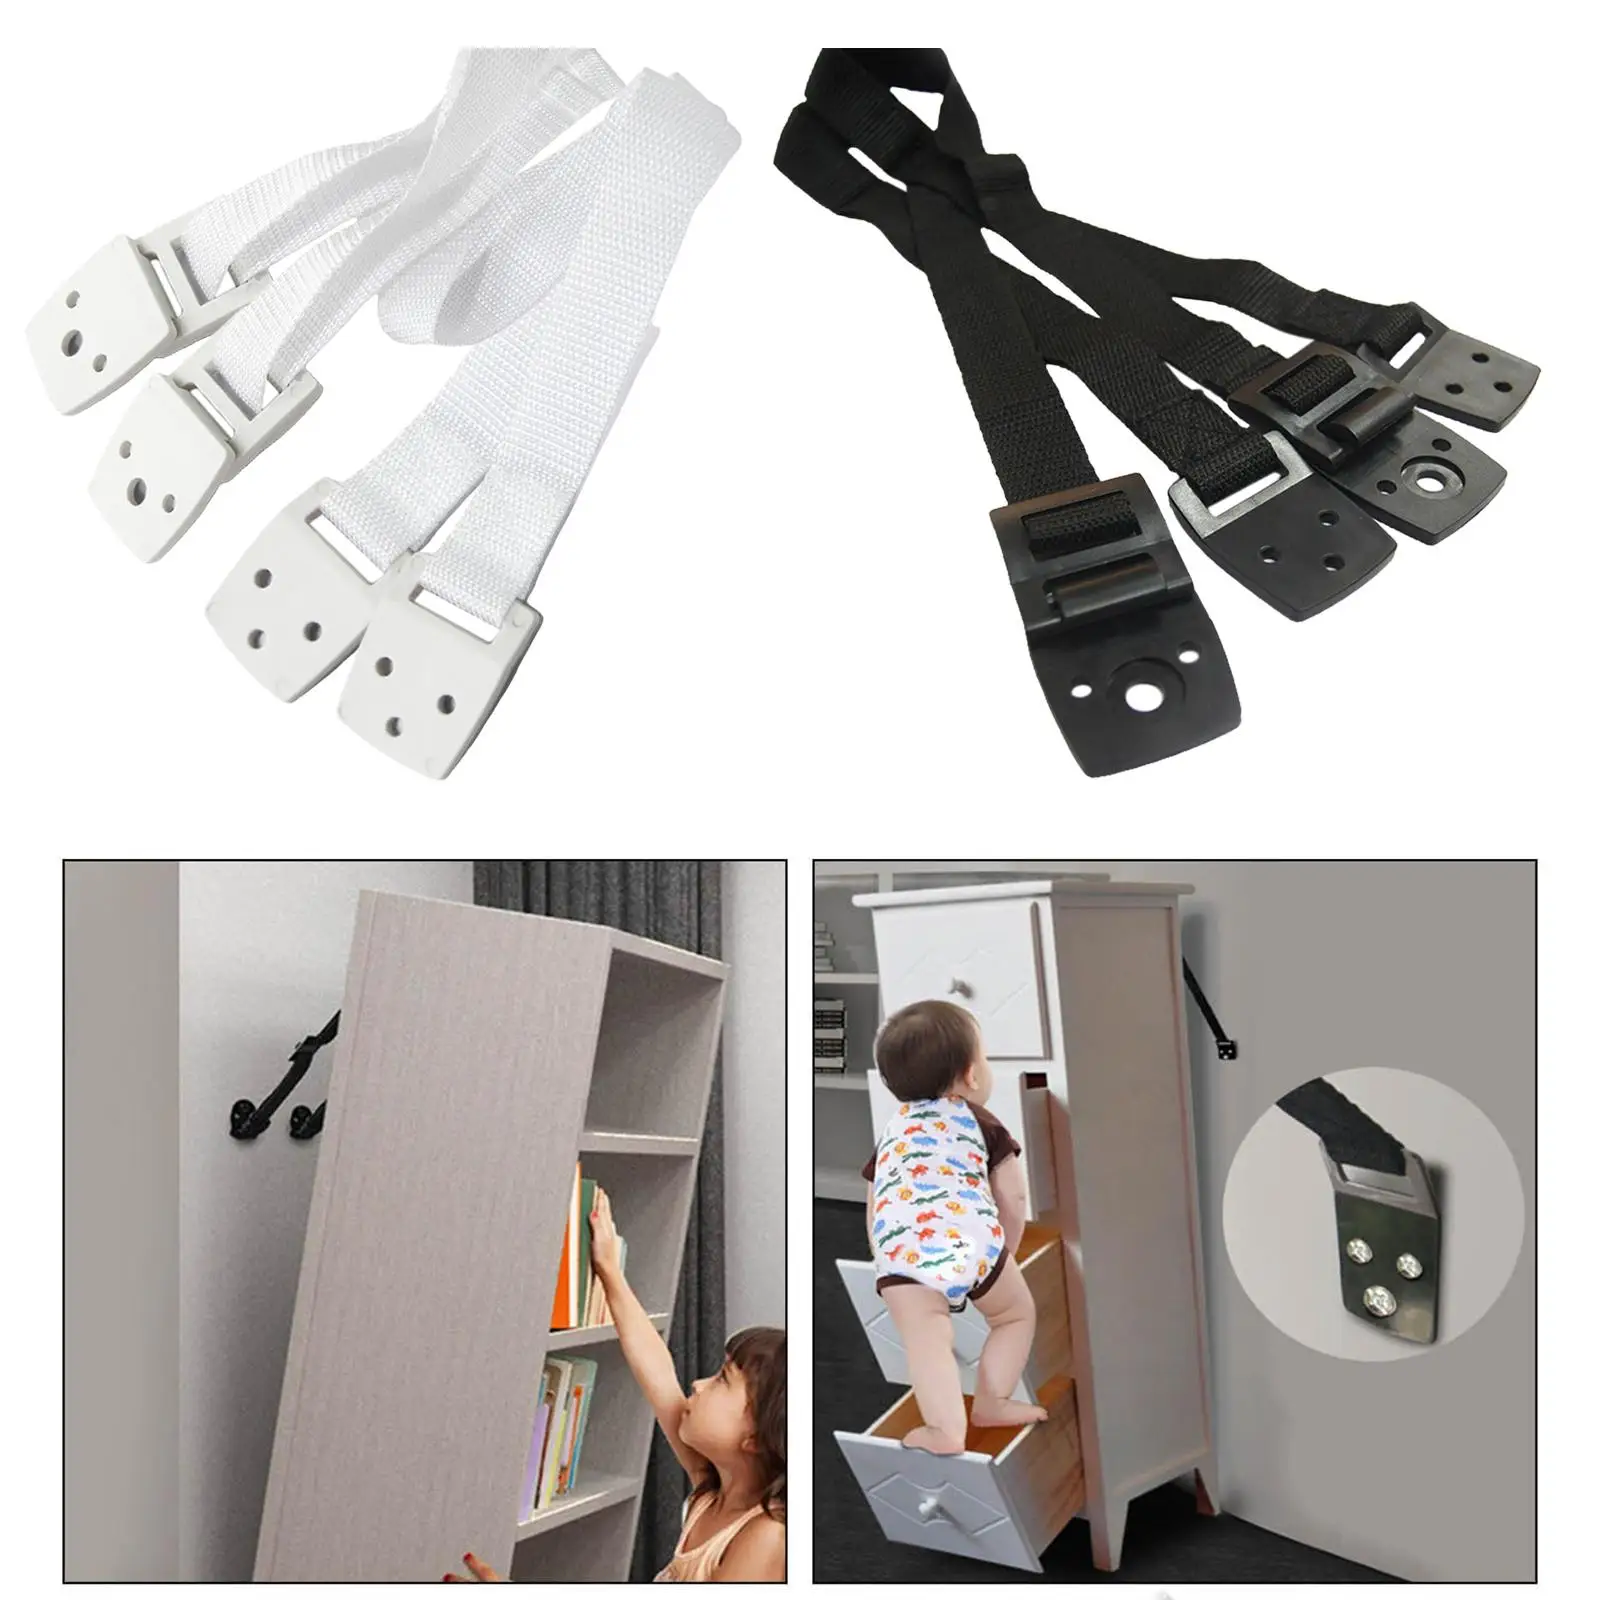 TV Anti Tip Straps Harness Holder for Children Kids Proofing Protection